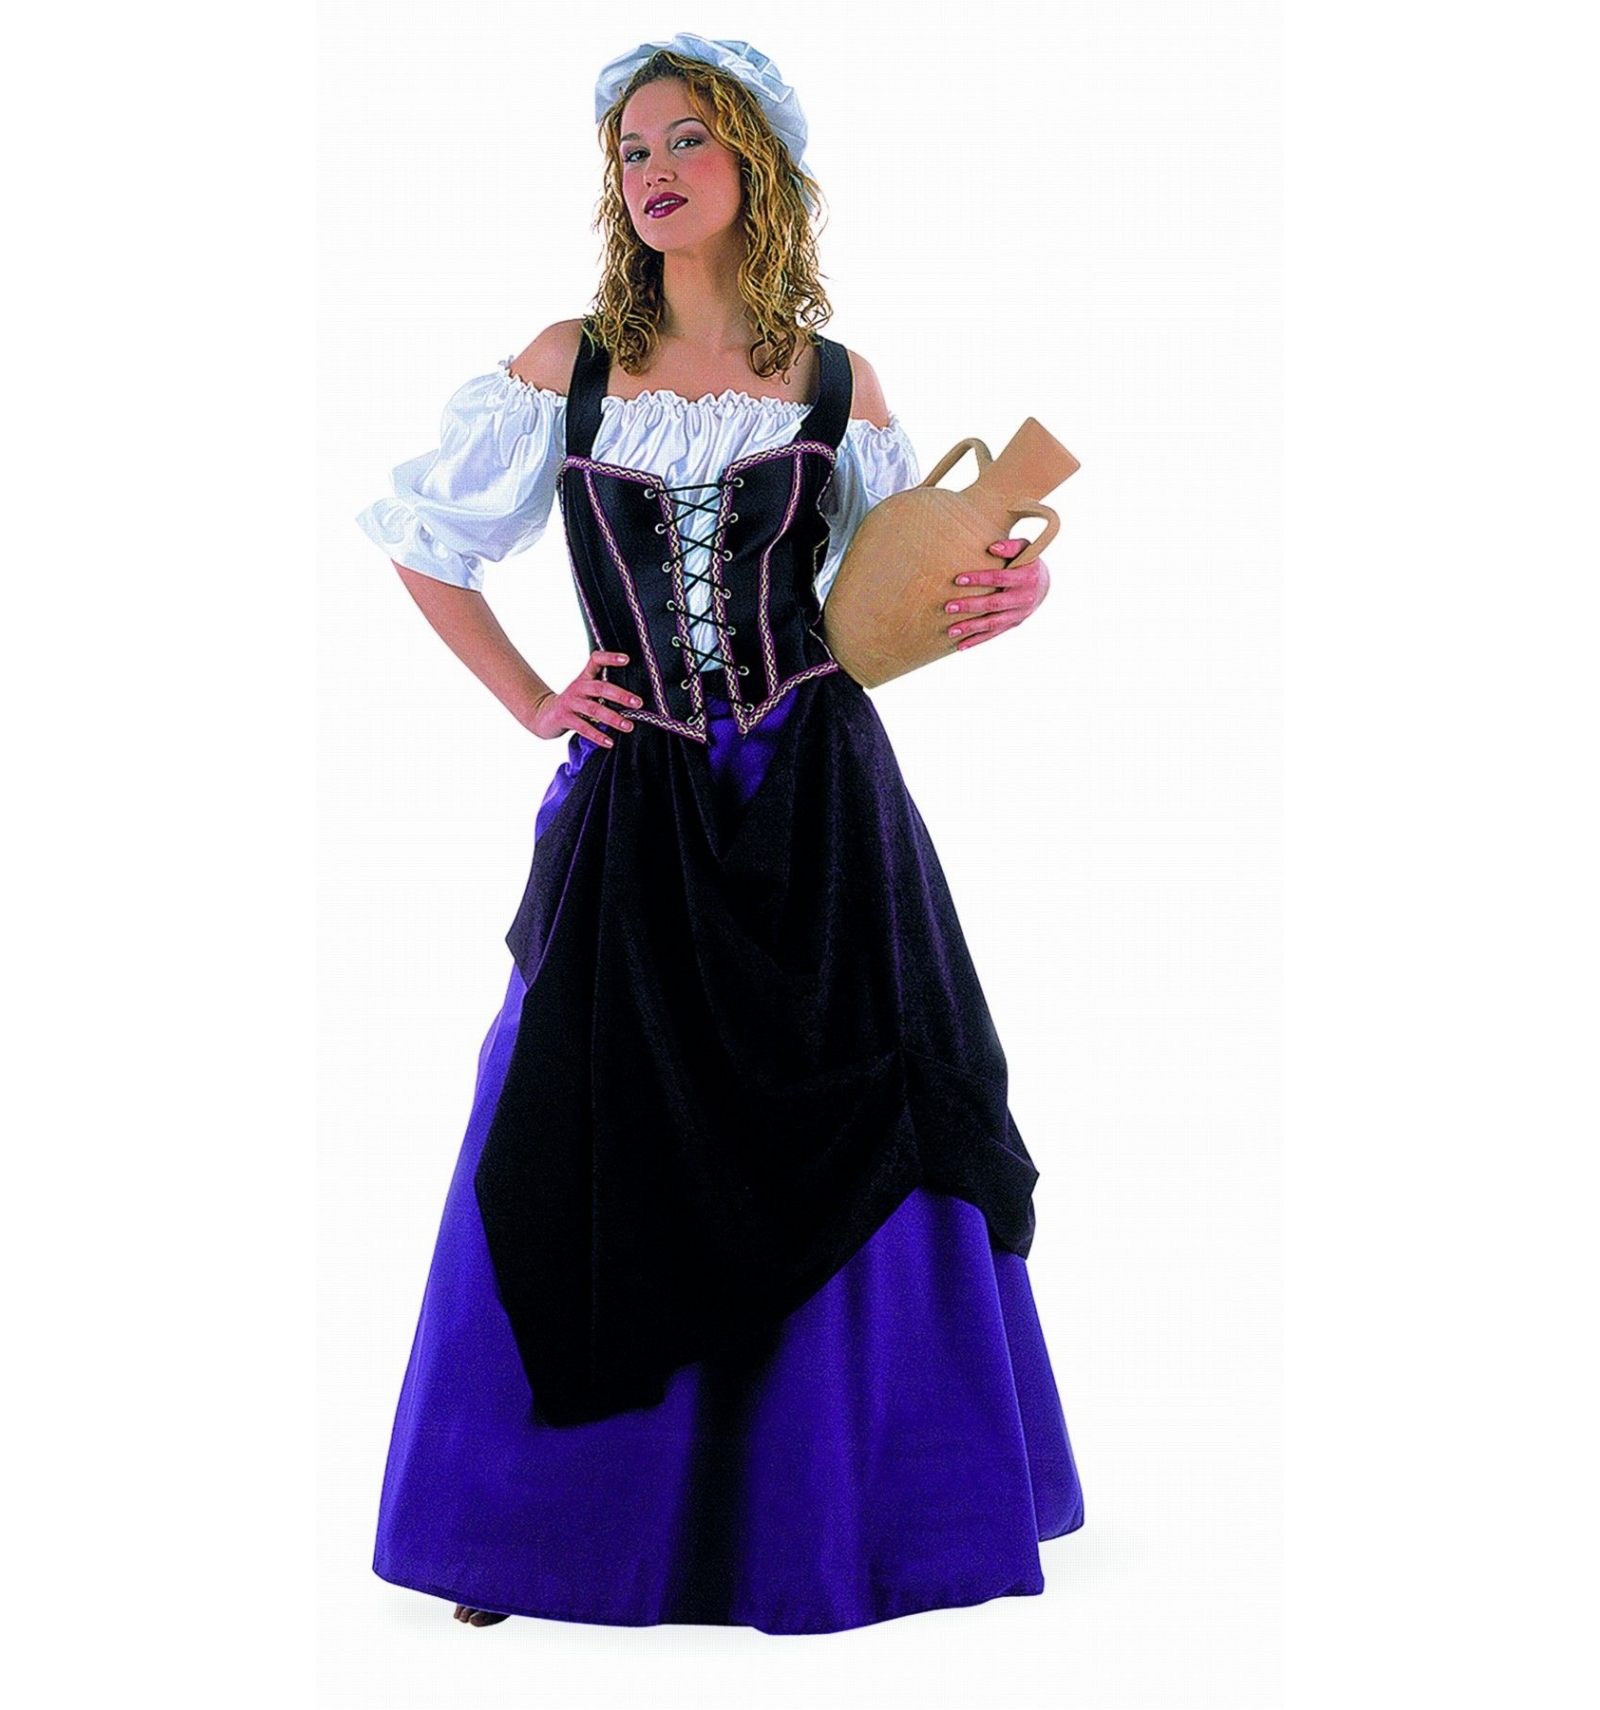 Tavern wench medieval costume.